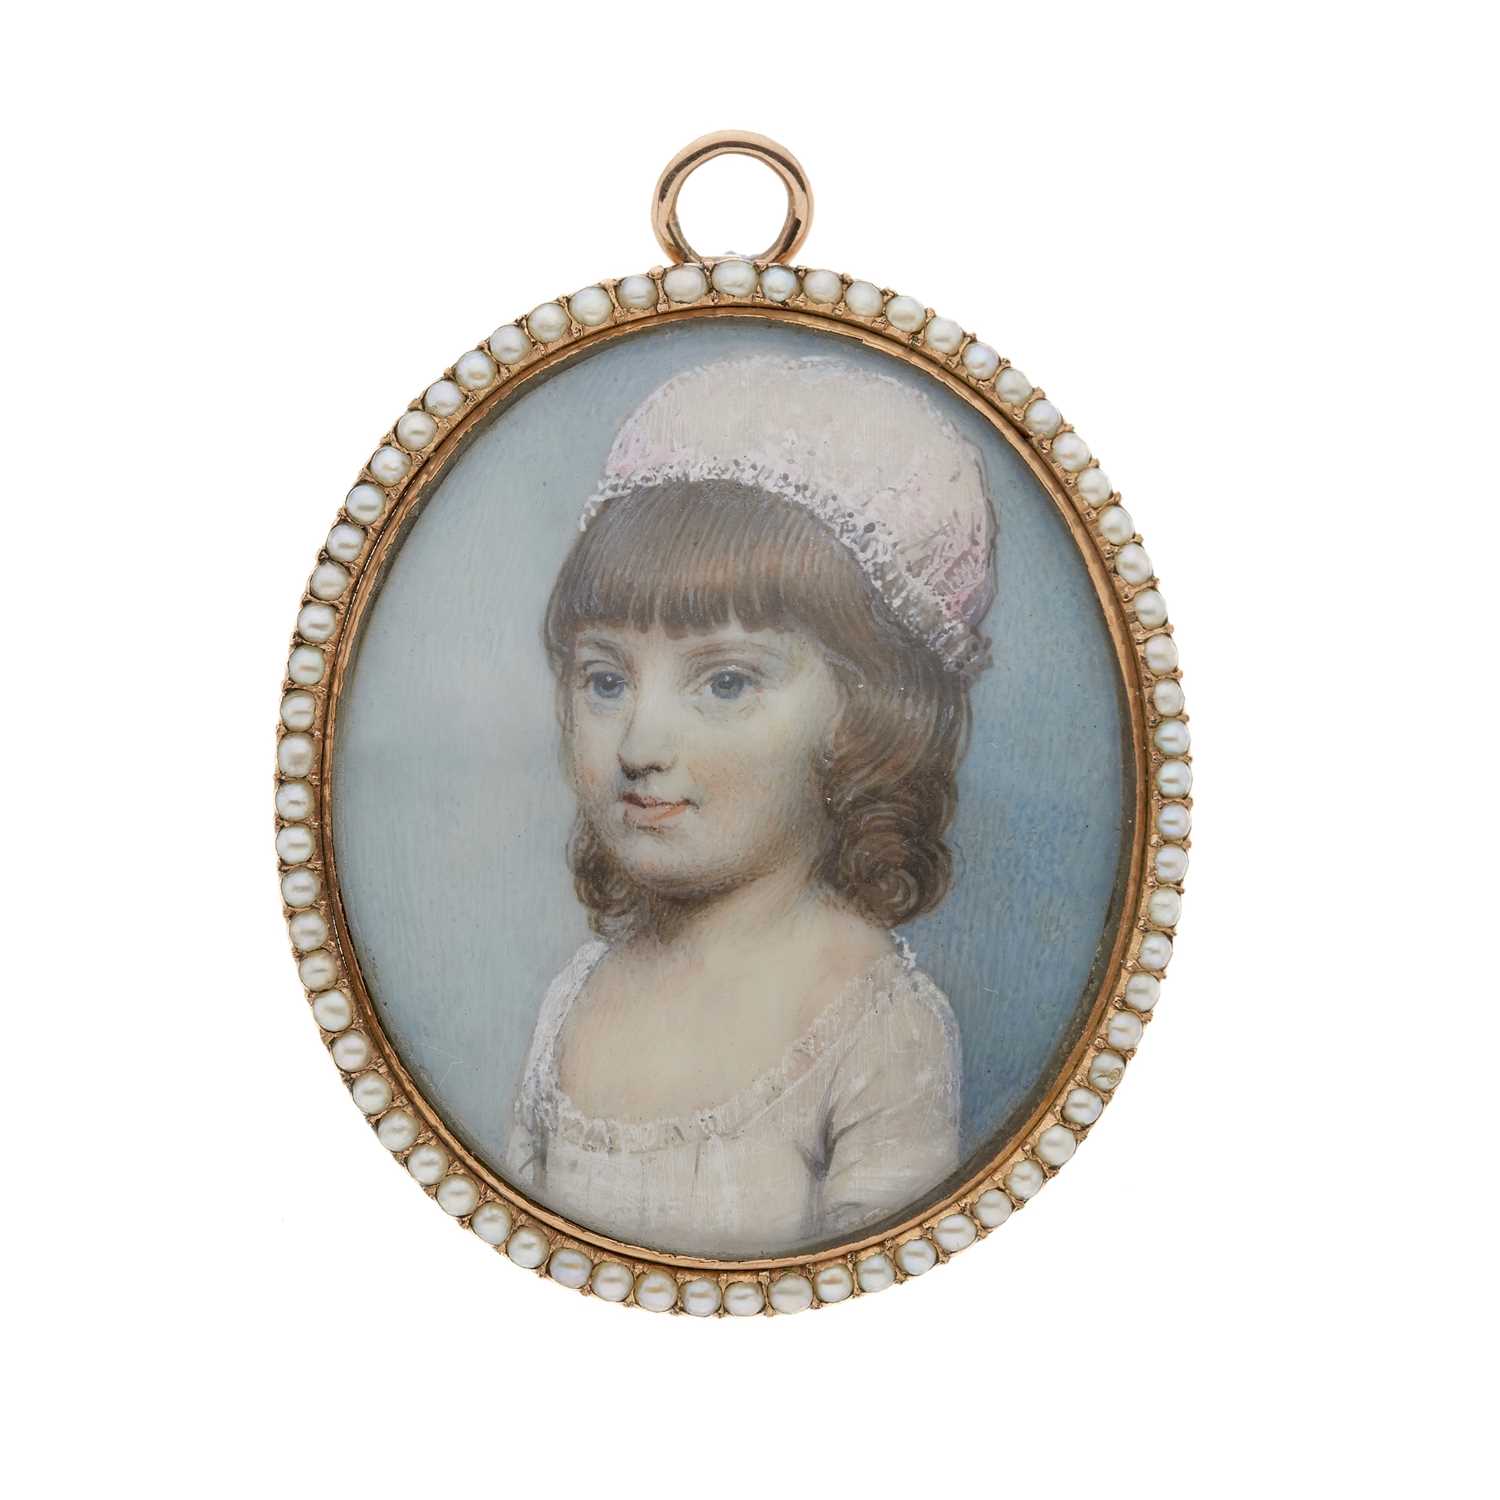 Lot 85 - George Engleheart (1750-1829), a fine portrait miniature of a young girl, circa 1785